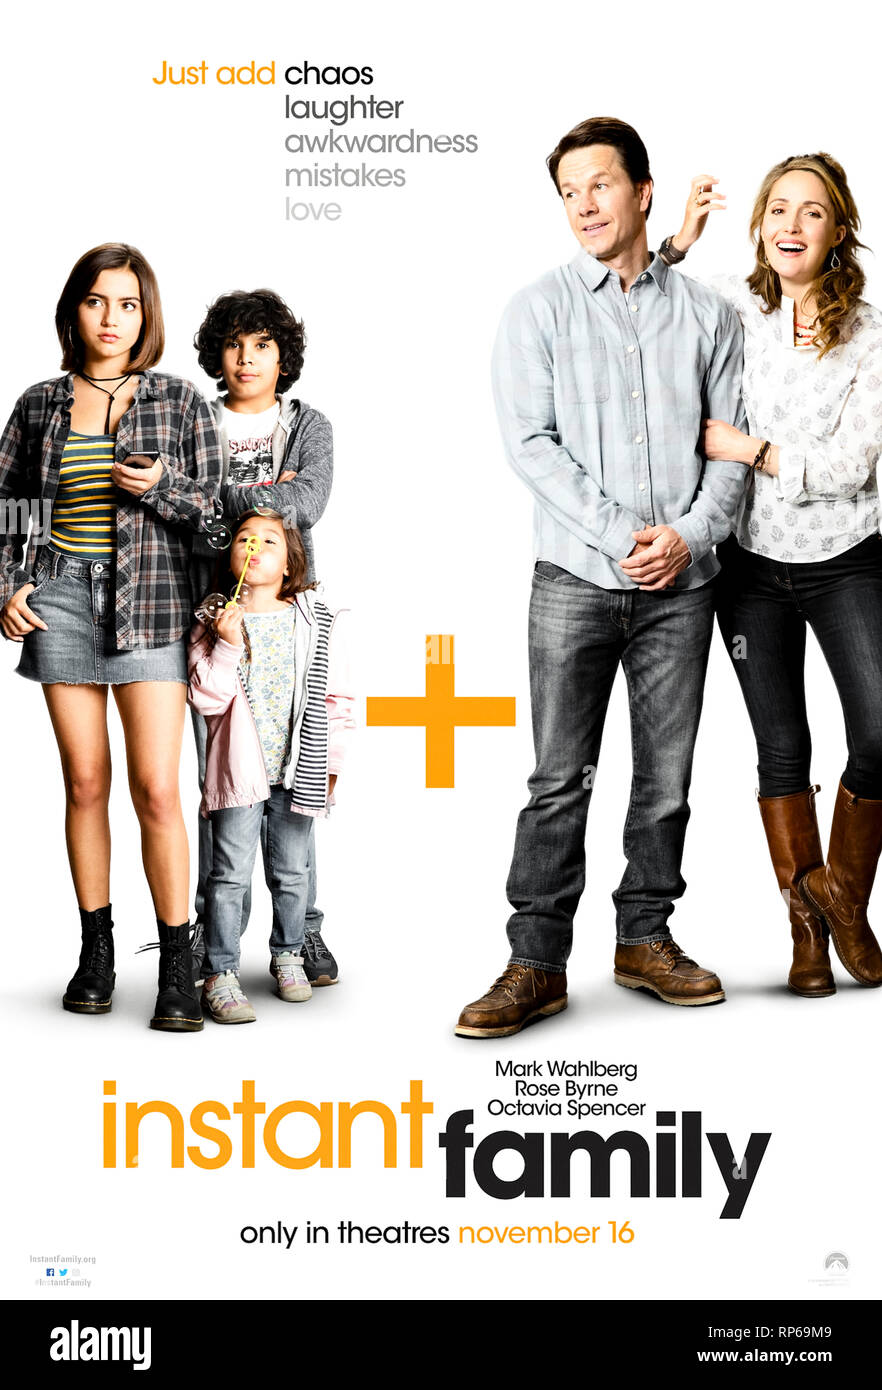 Instant Family (2018) directed by Sean Anders and starring Mark Wahlberg, Rose Byrne, Isabela Moner and Gustavo Quiroz. Stock Photo